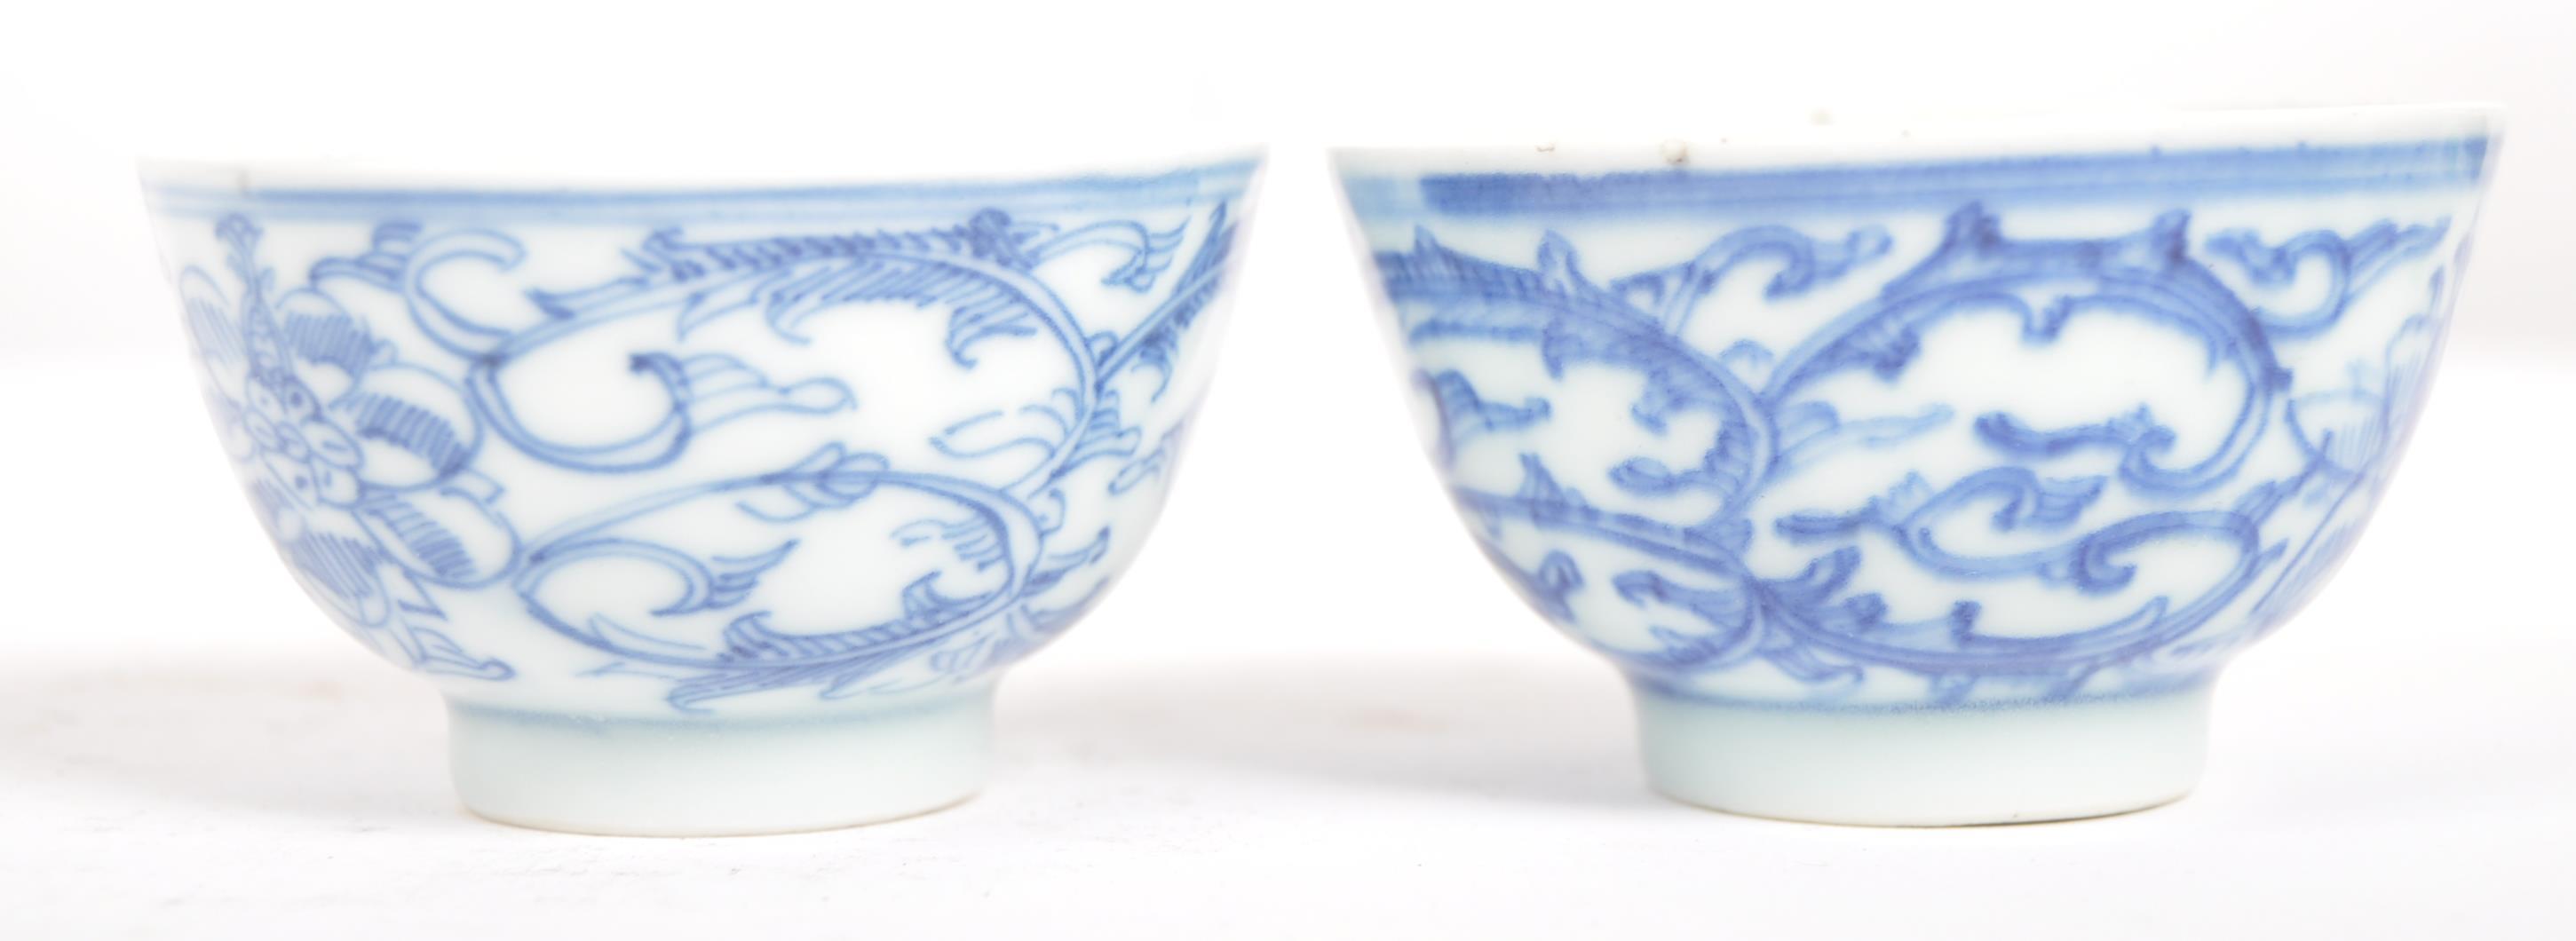 PAIR OF 19TH CENTURY CHINESE TEA BOWLS - Image 5 of 5